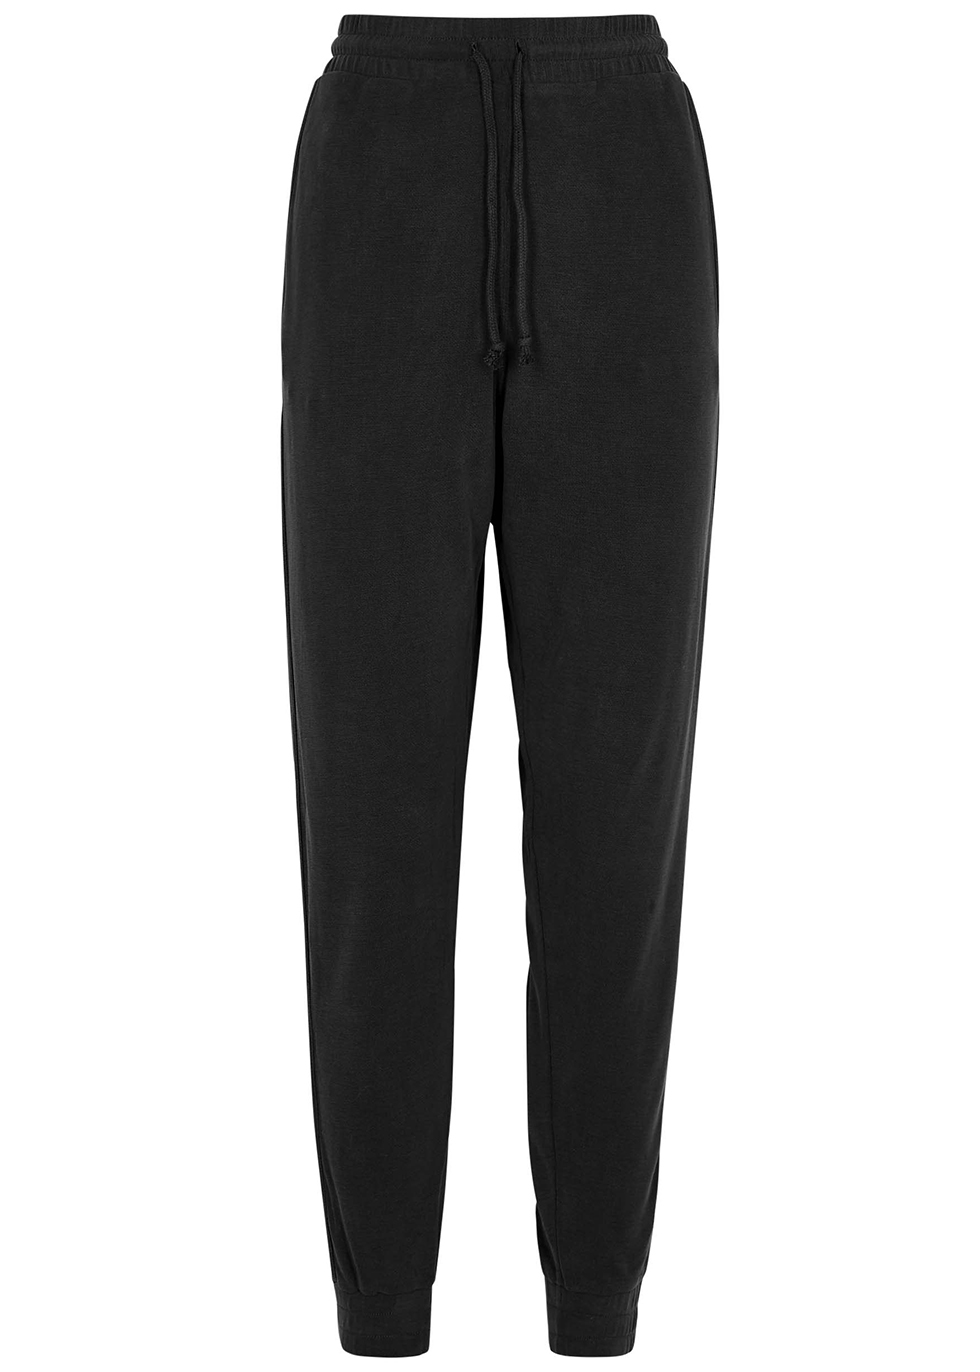 Free People Movement Back Into It charcoal stretch-modal sweatpants ...